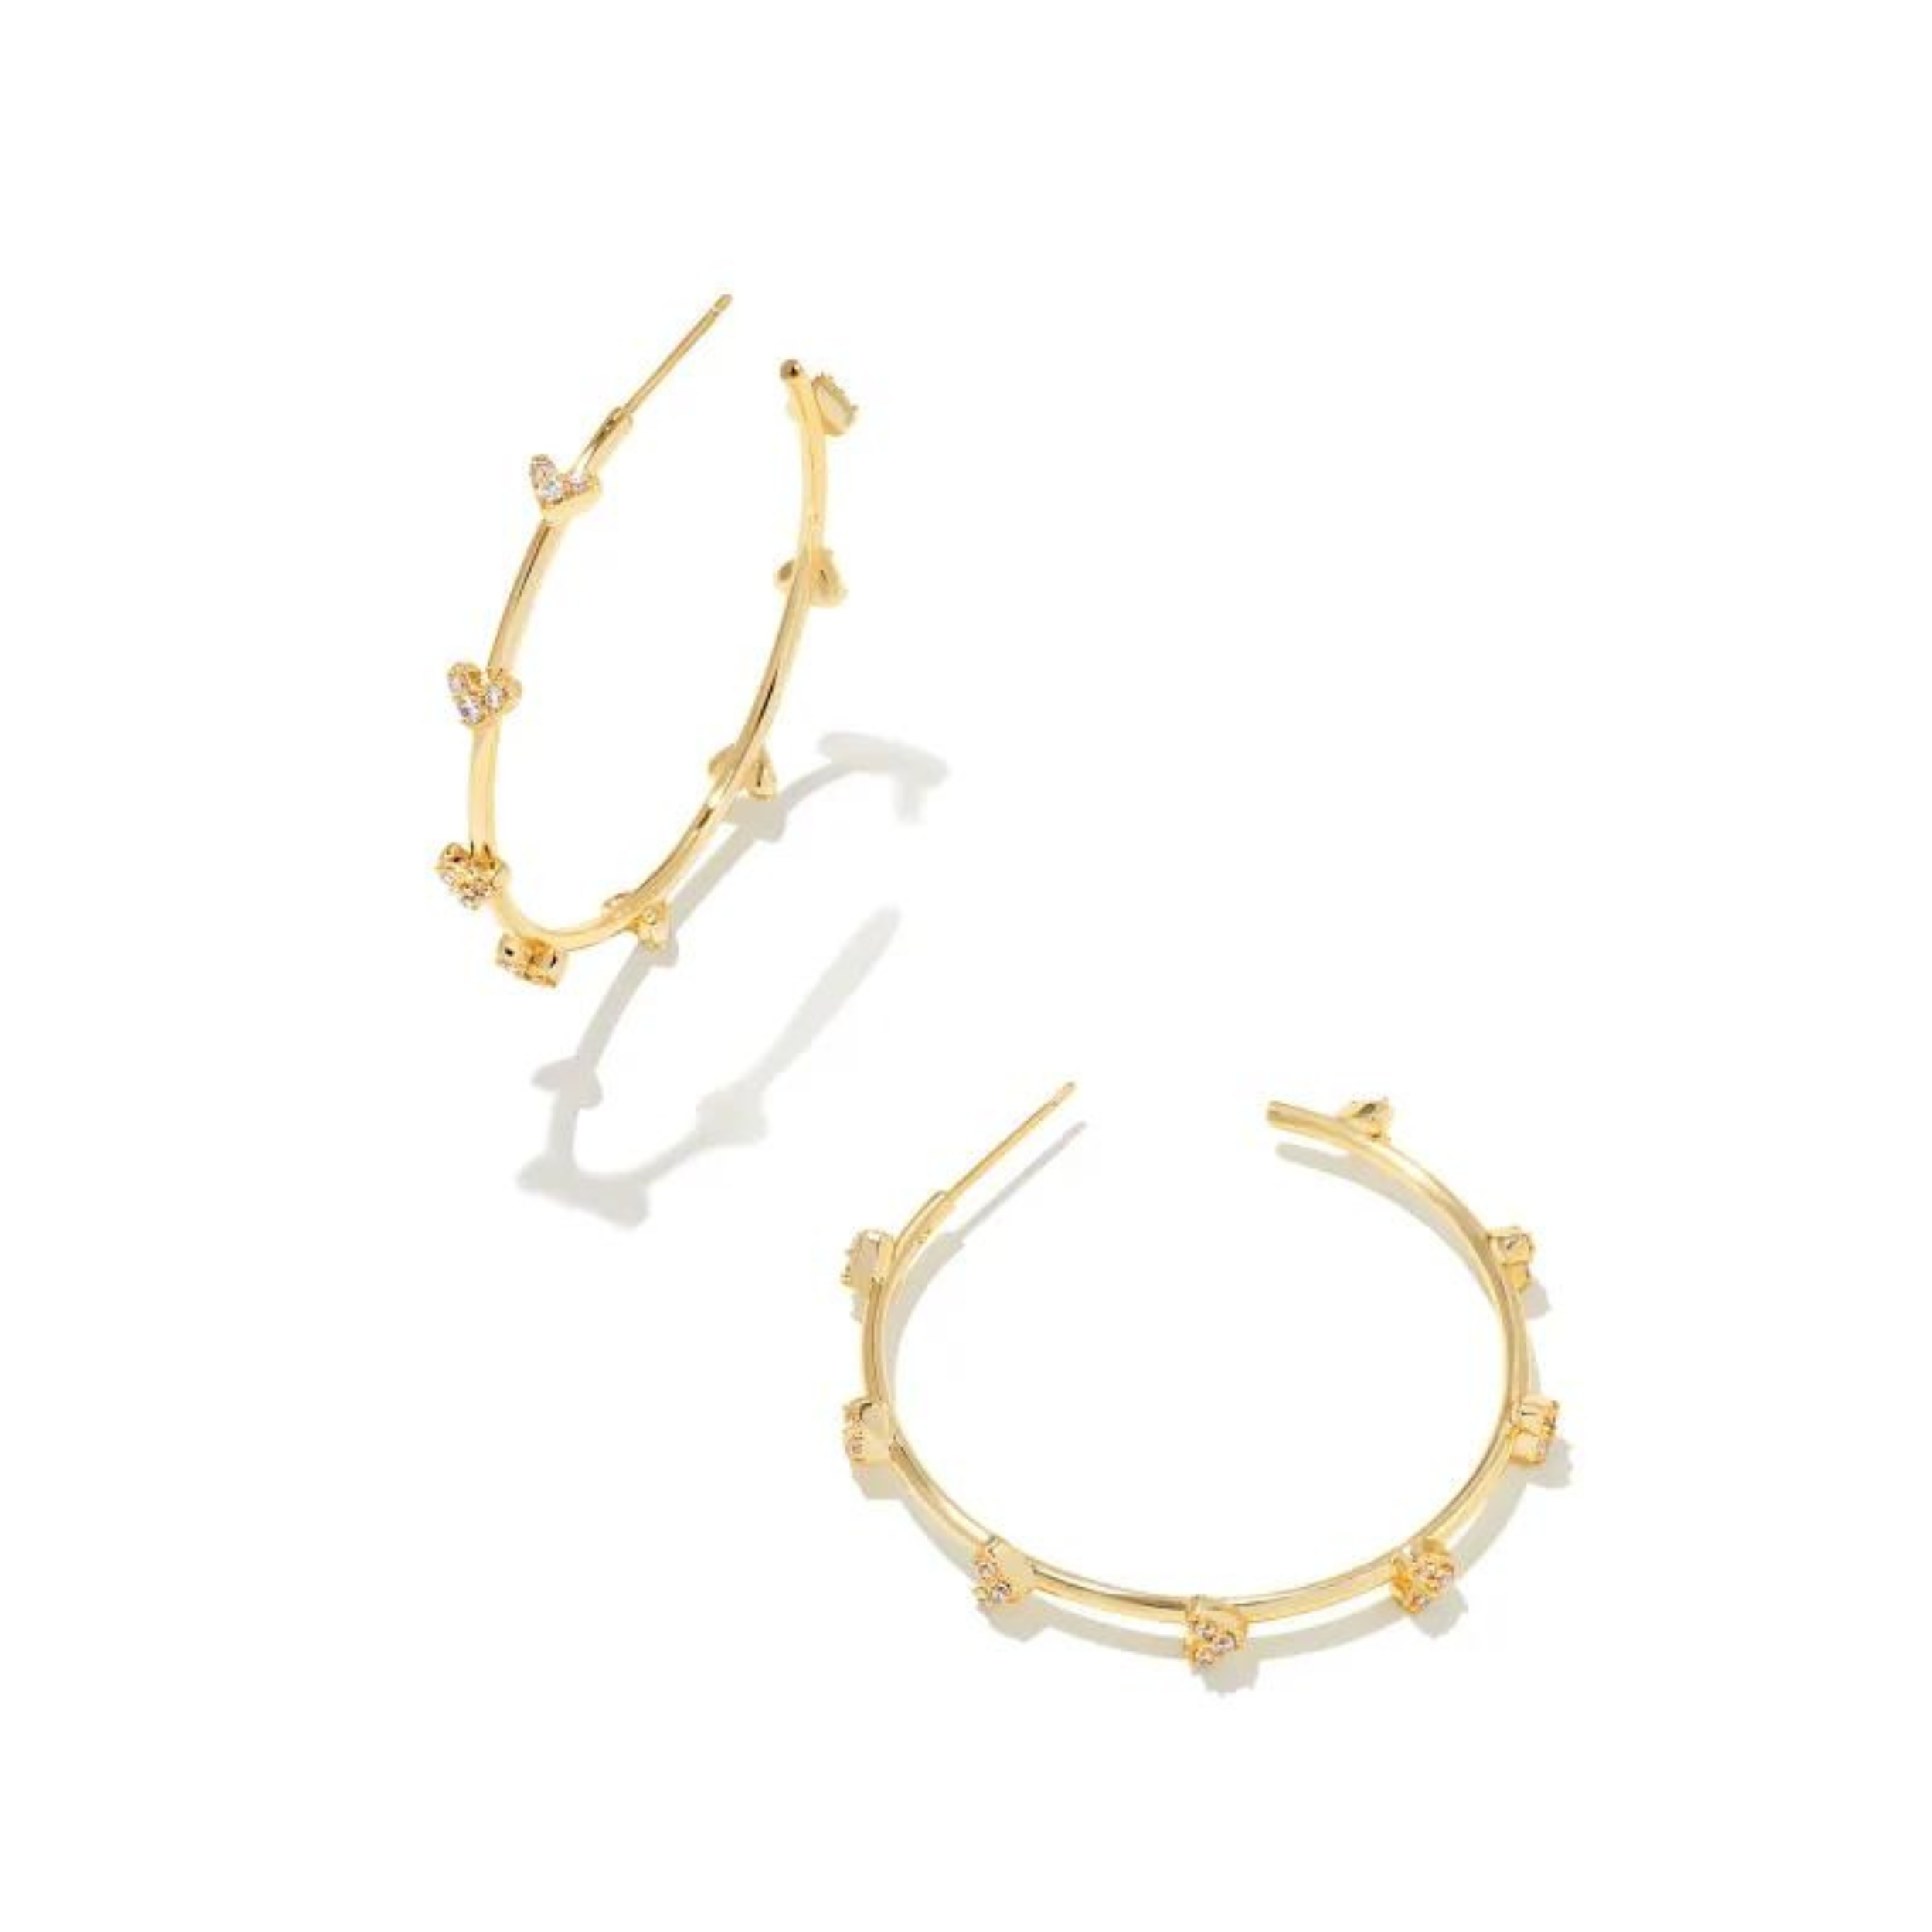 Gold hoop earrings with white crystal hearts pictured on a white background. 